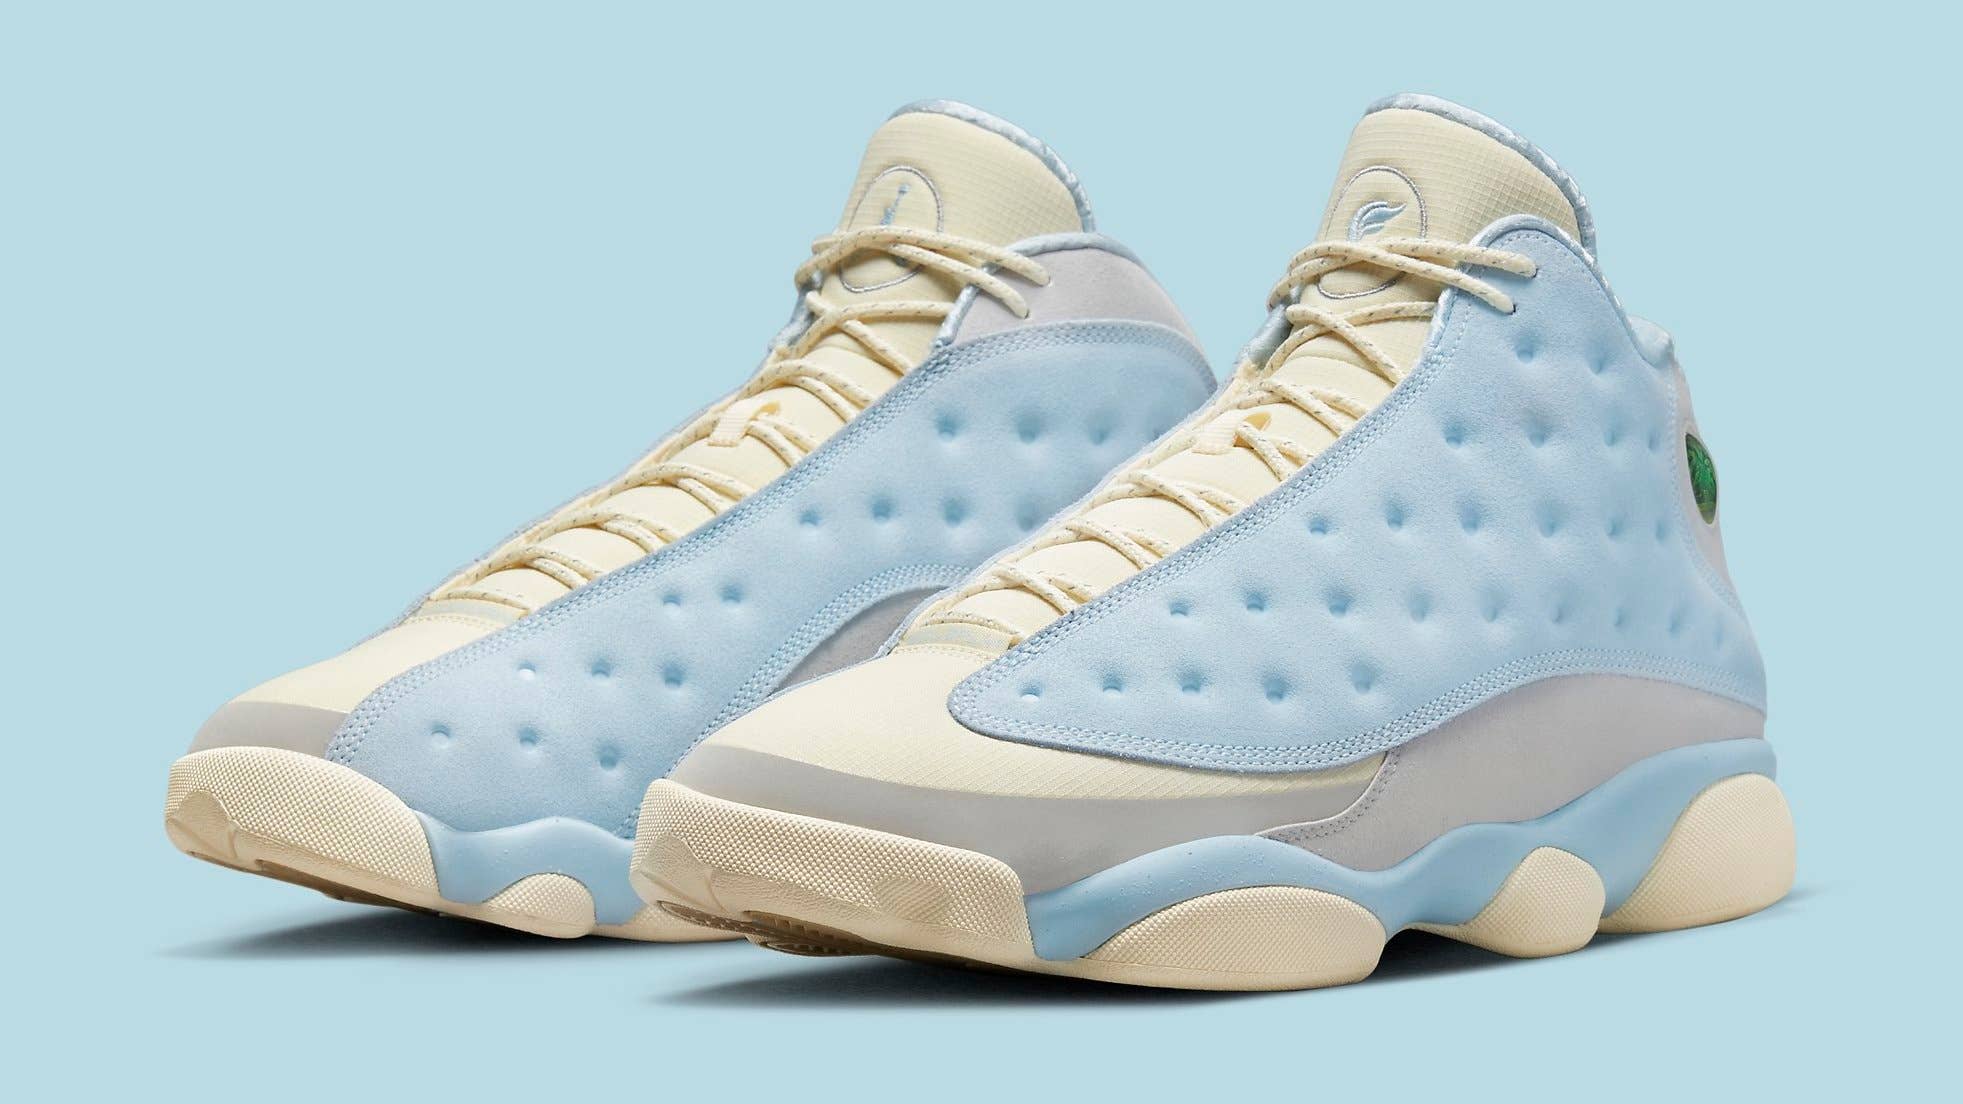 Buy Air Jordan 13 Shoes: New Releases & Iconic Styles